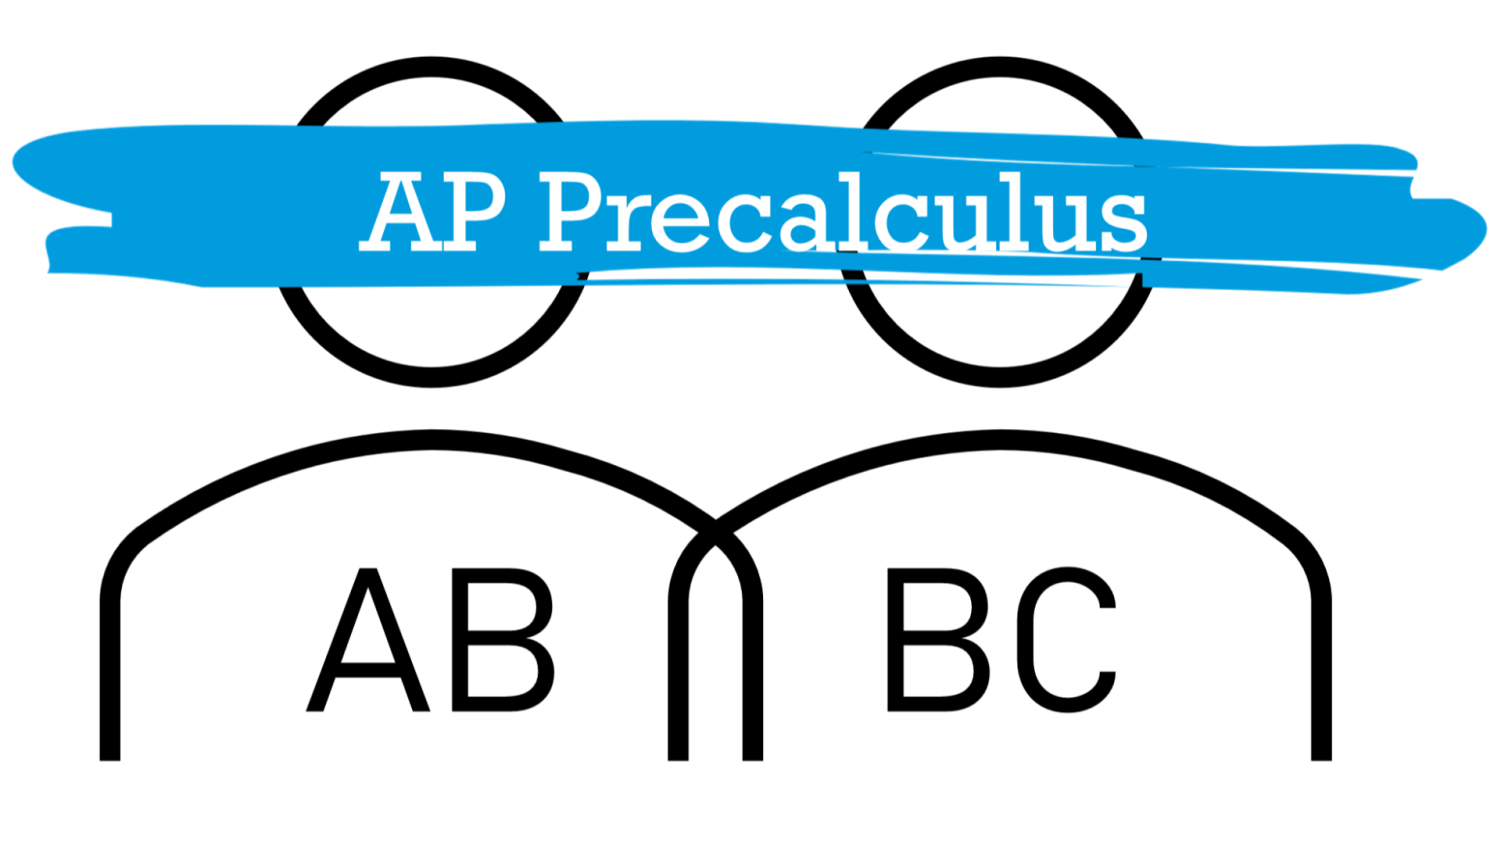 AP Precalculus comes to CVHS new curriculum, unexpected changes